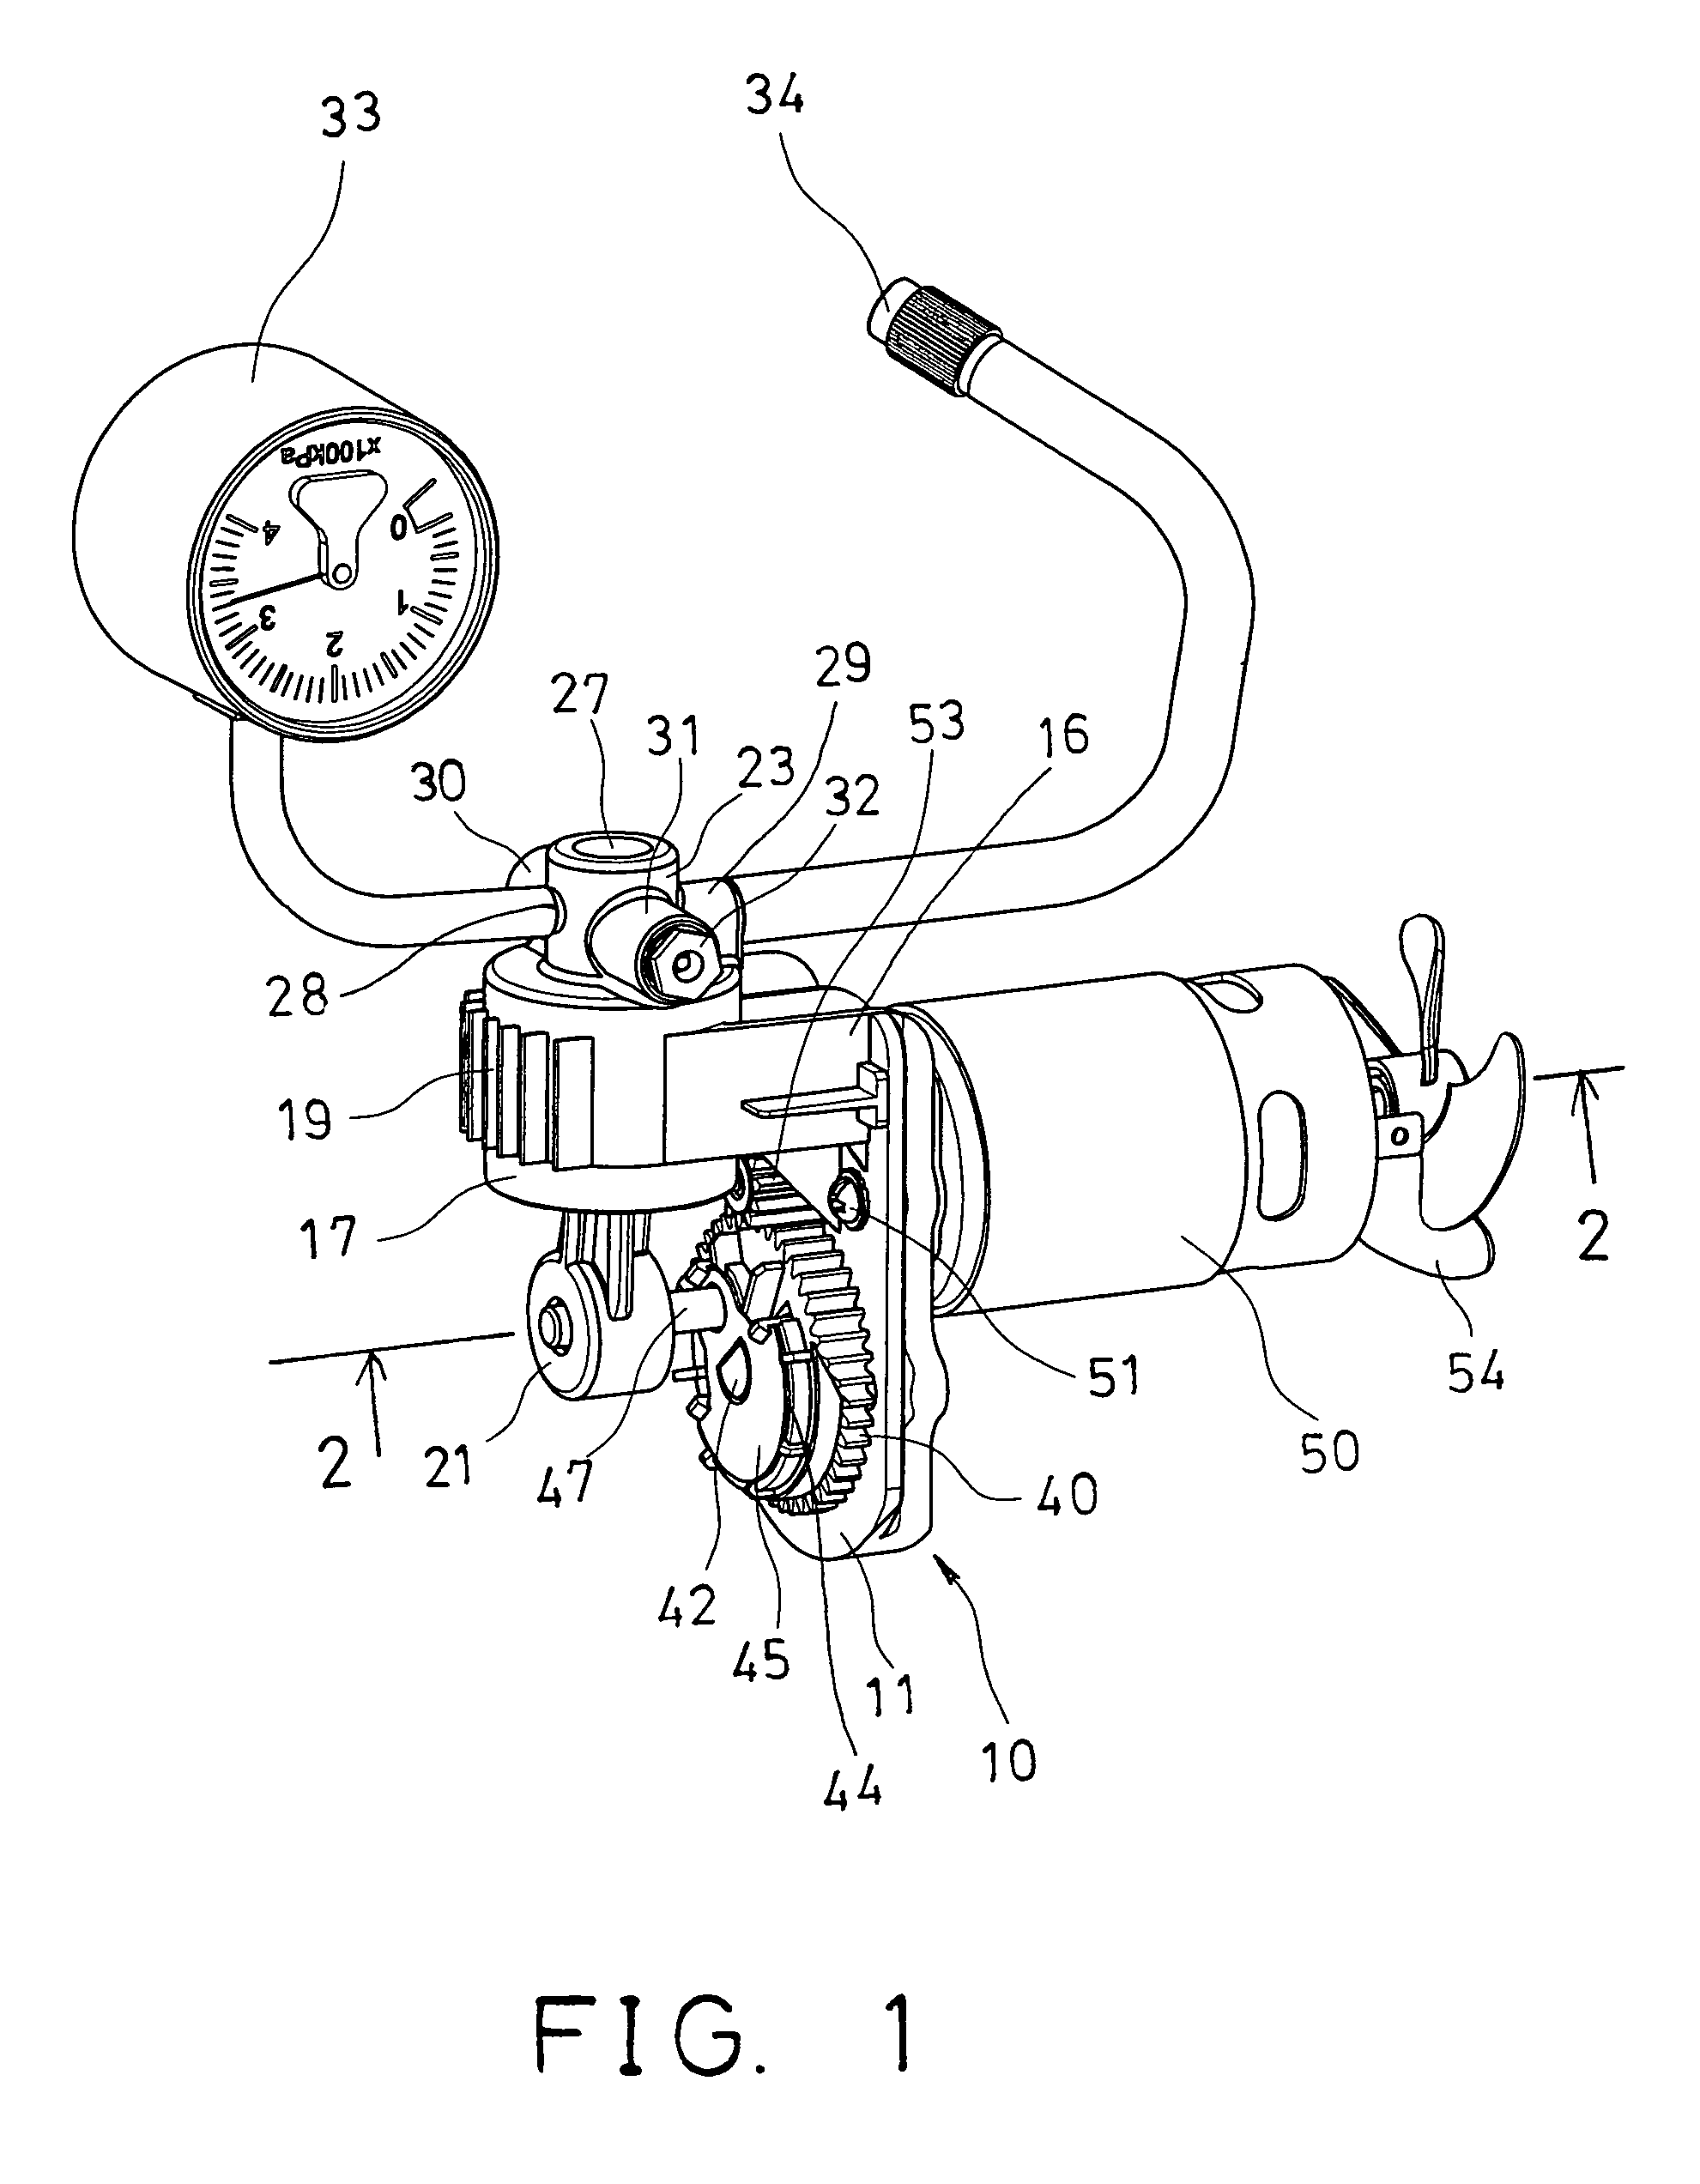 Air compressor having stable configuration